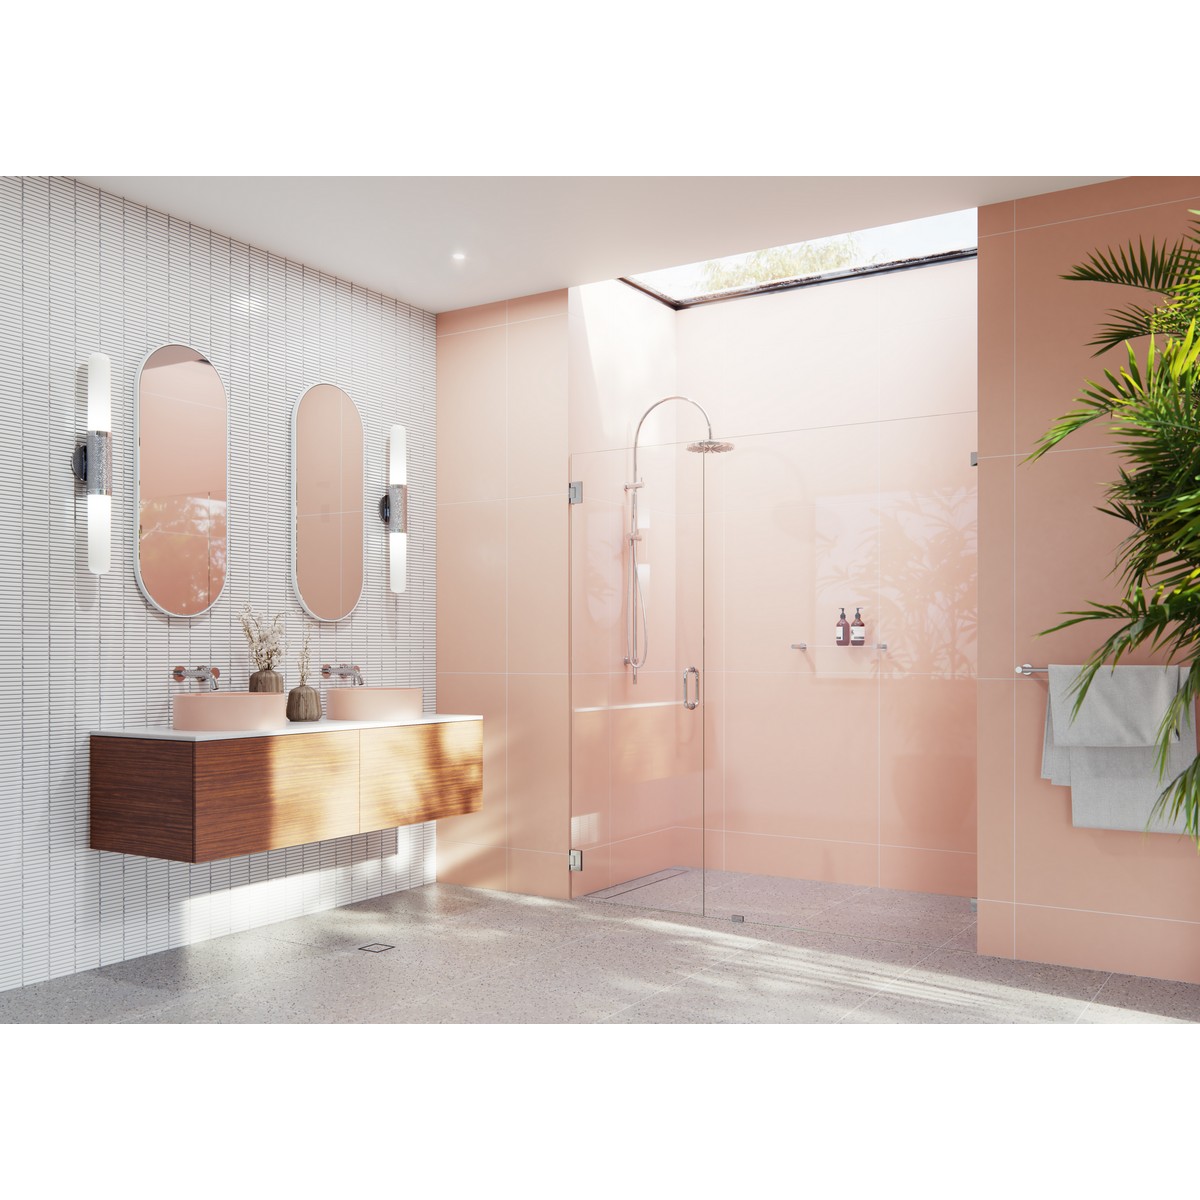 GLASS WAREHOUSE GW-WH-65.25 ILLUME 65 1/4 W X 78 H WALL HINGED FULLY FRAMELESS GLASS SHOWER ENCLOSURE